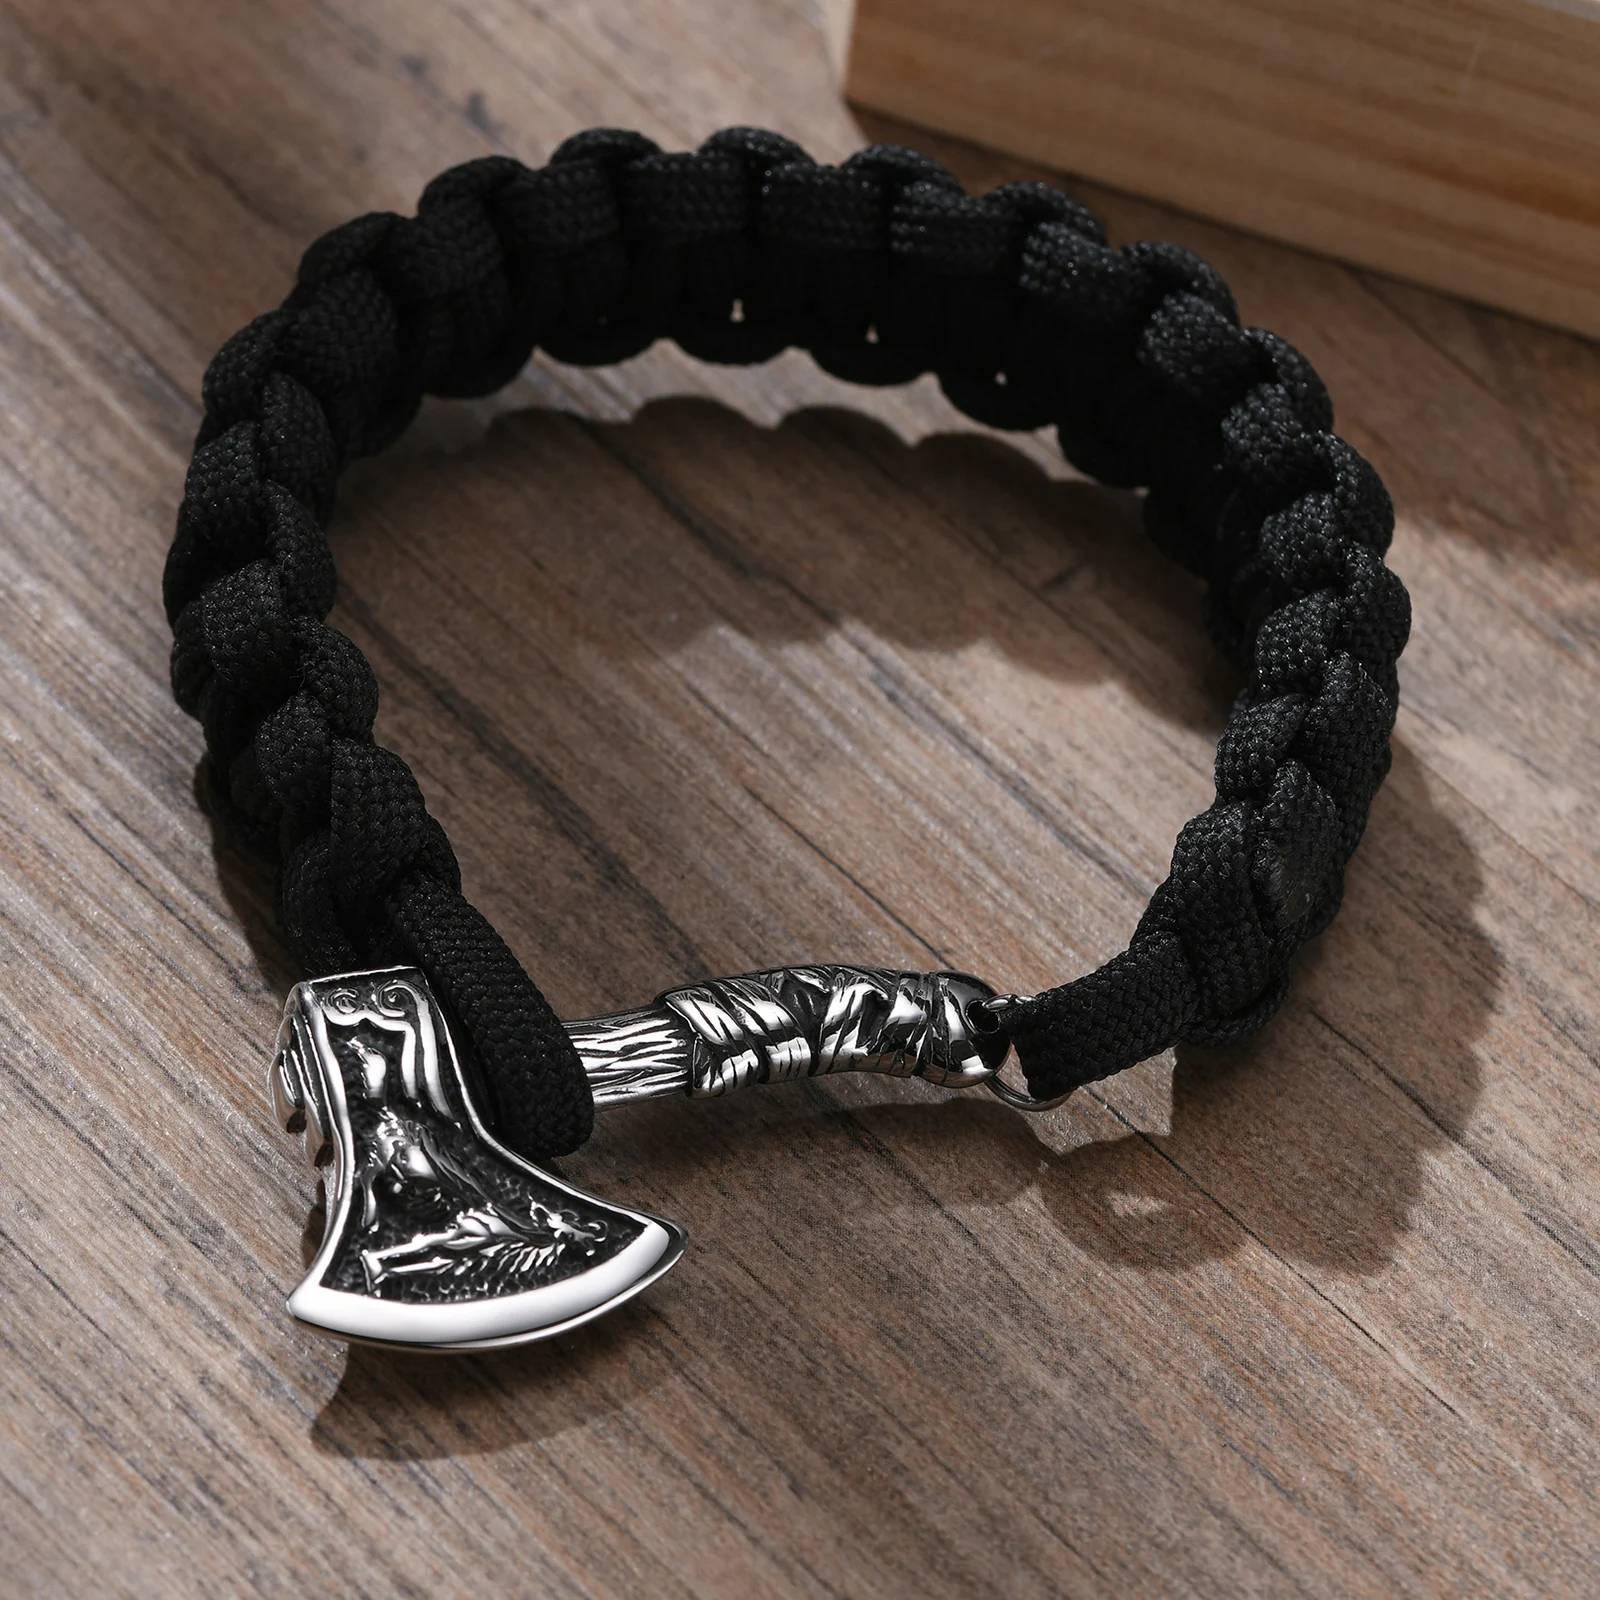  Mjolnir Thor's Hummer Black Leather Viking Bracelet Fathers Day  Dad Gift for Men - Mens Leather Cuff Wristband - Genuine Leather Viking  Punk Lv Axe Сuffs - Size 6-7 inches 90mc : Handmade Products